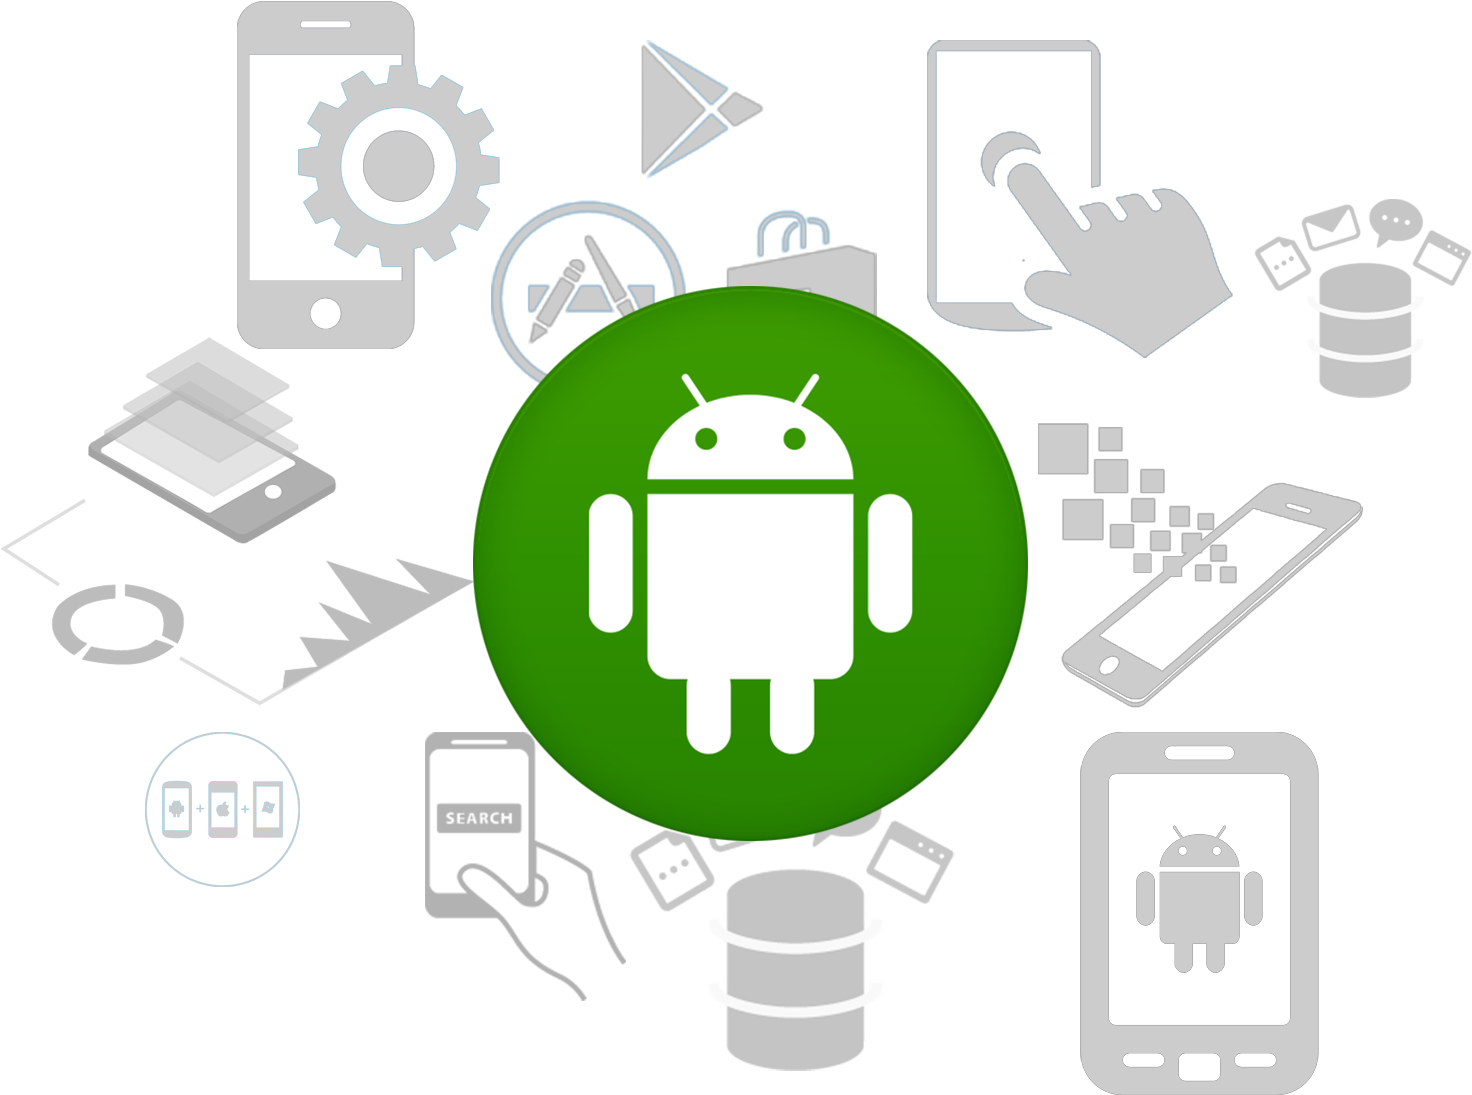 Android programmes. Разработка приложений для Android. Разработка мобильных приложений на андроид. Разработка приложения для андроид. Андроид Разработчик.